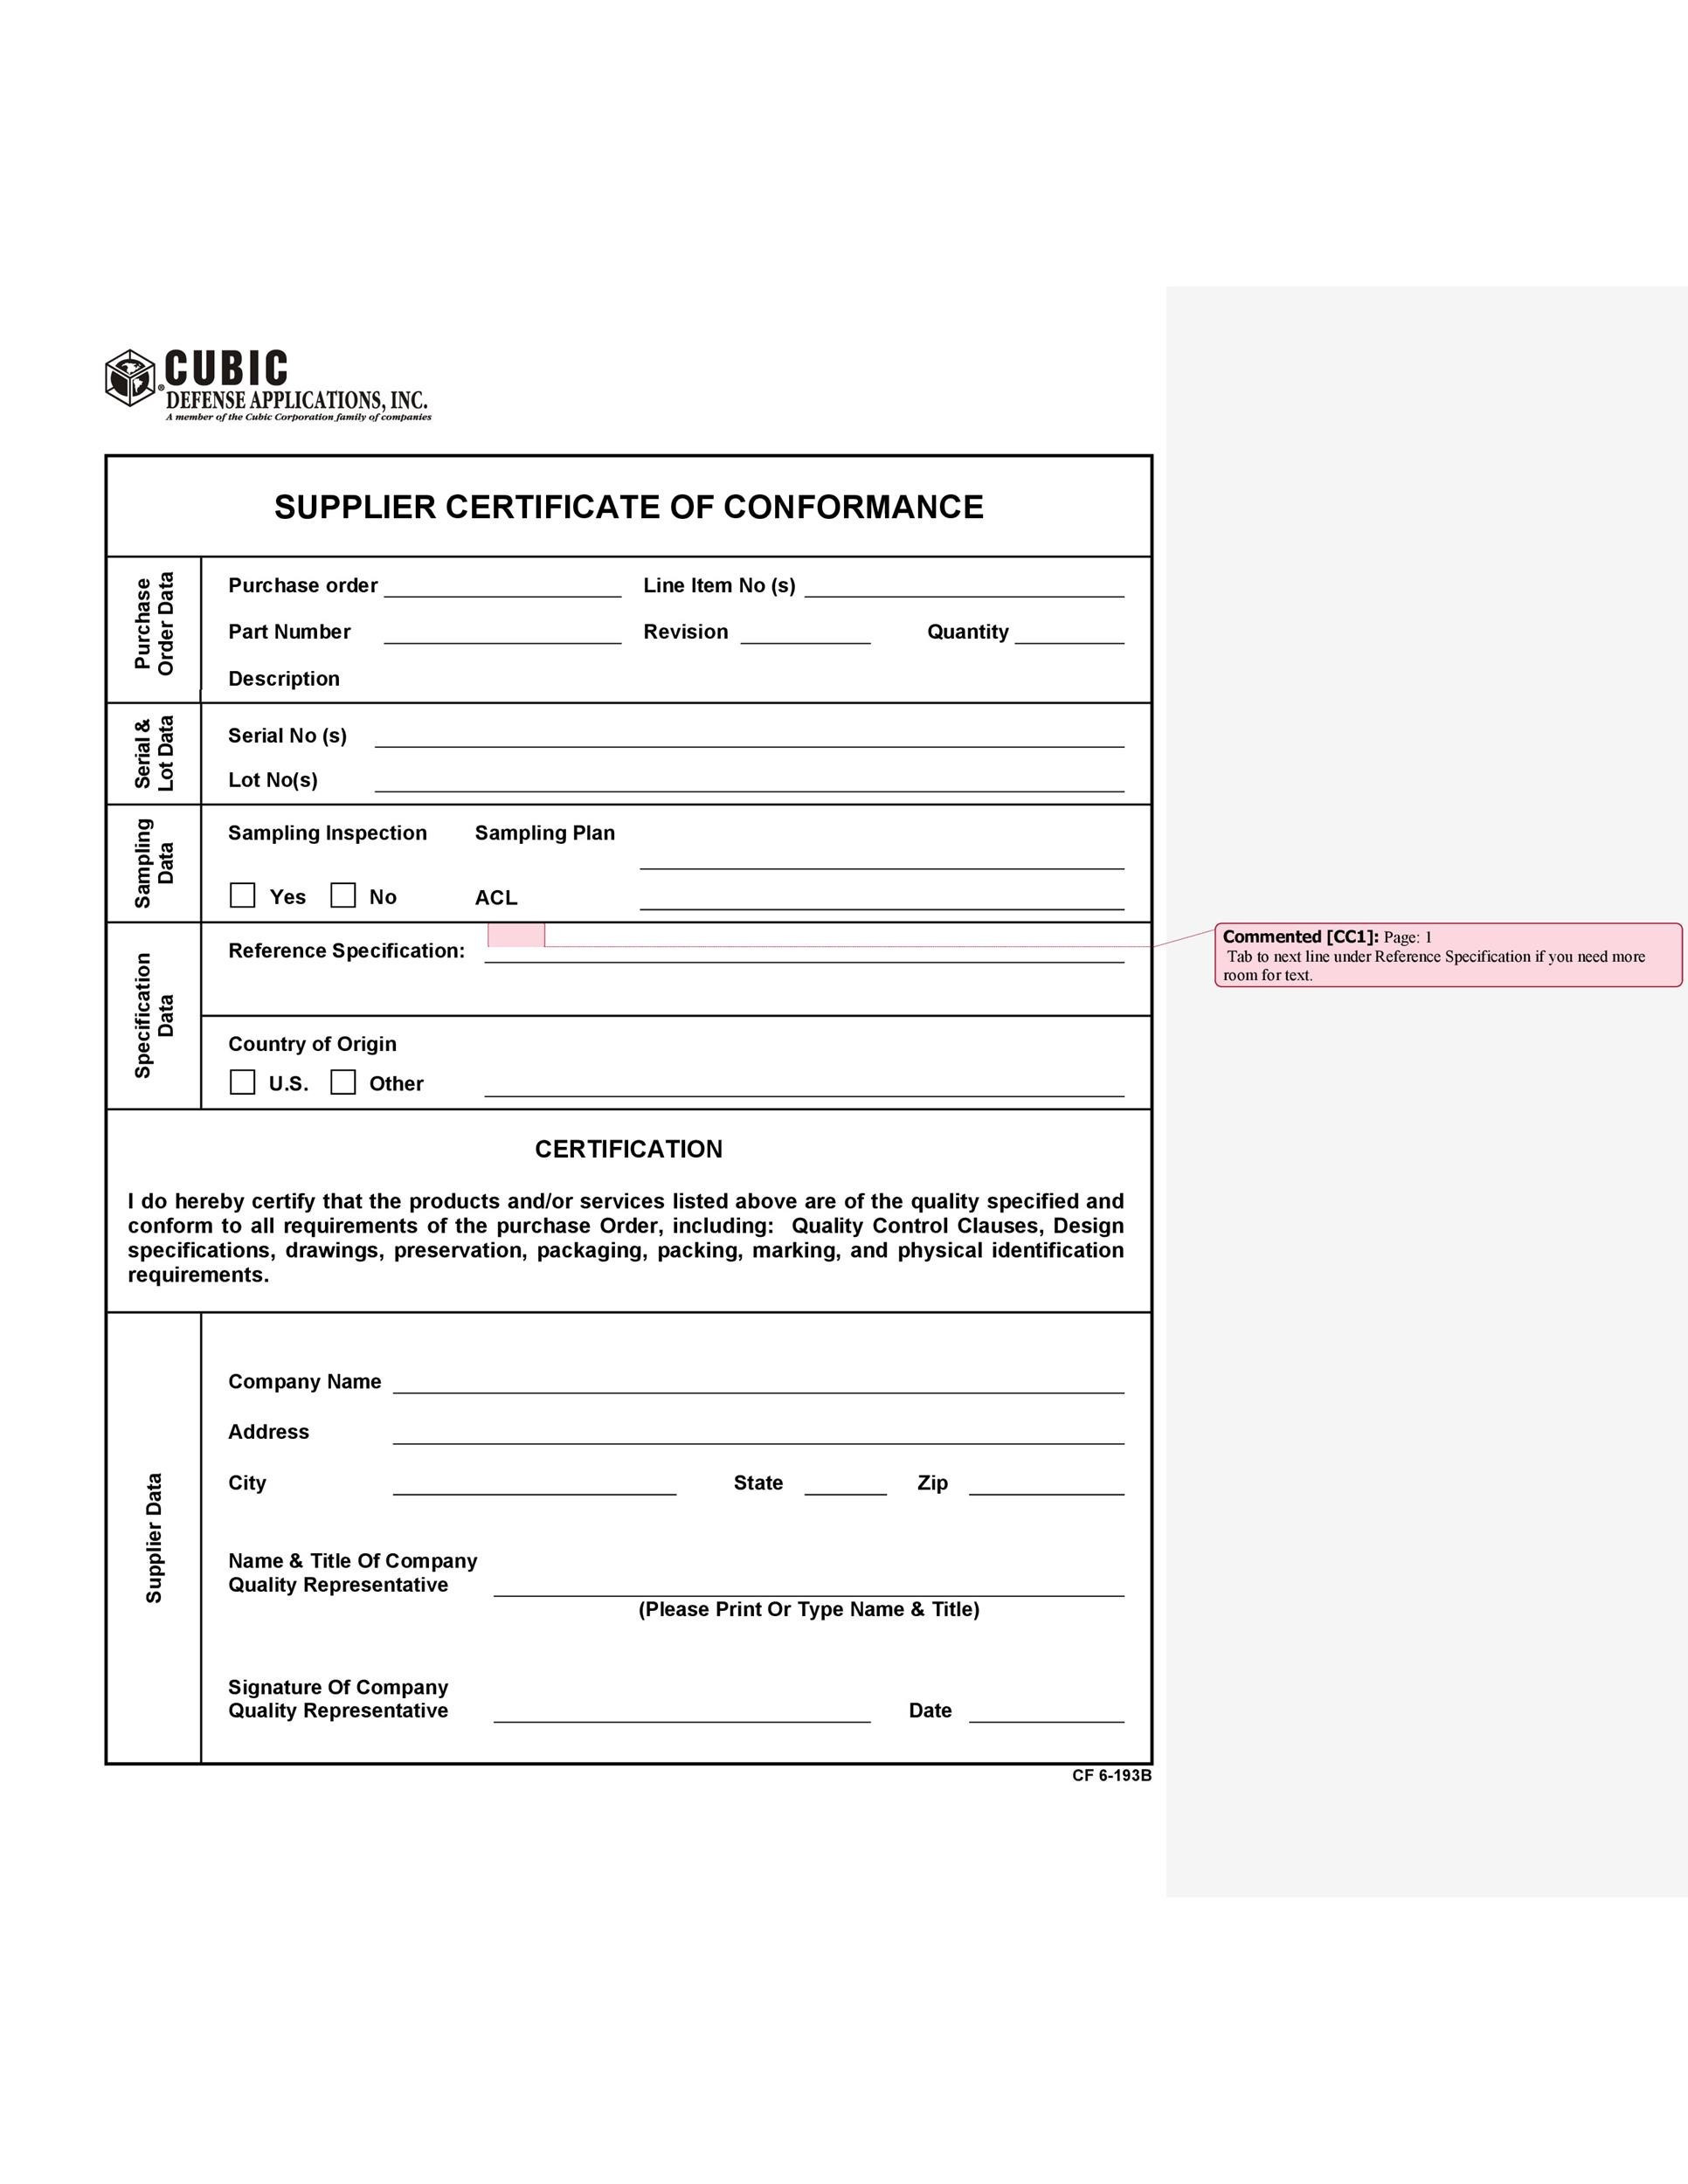 Certificate Of Conformance Template 40 Free Certificate Of Conformance Templates &amp; forms